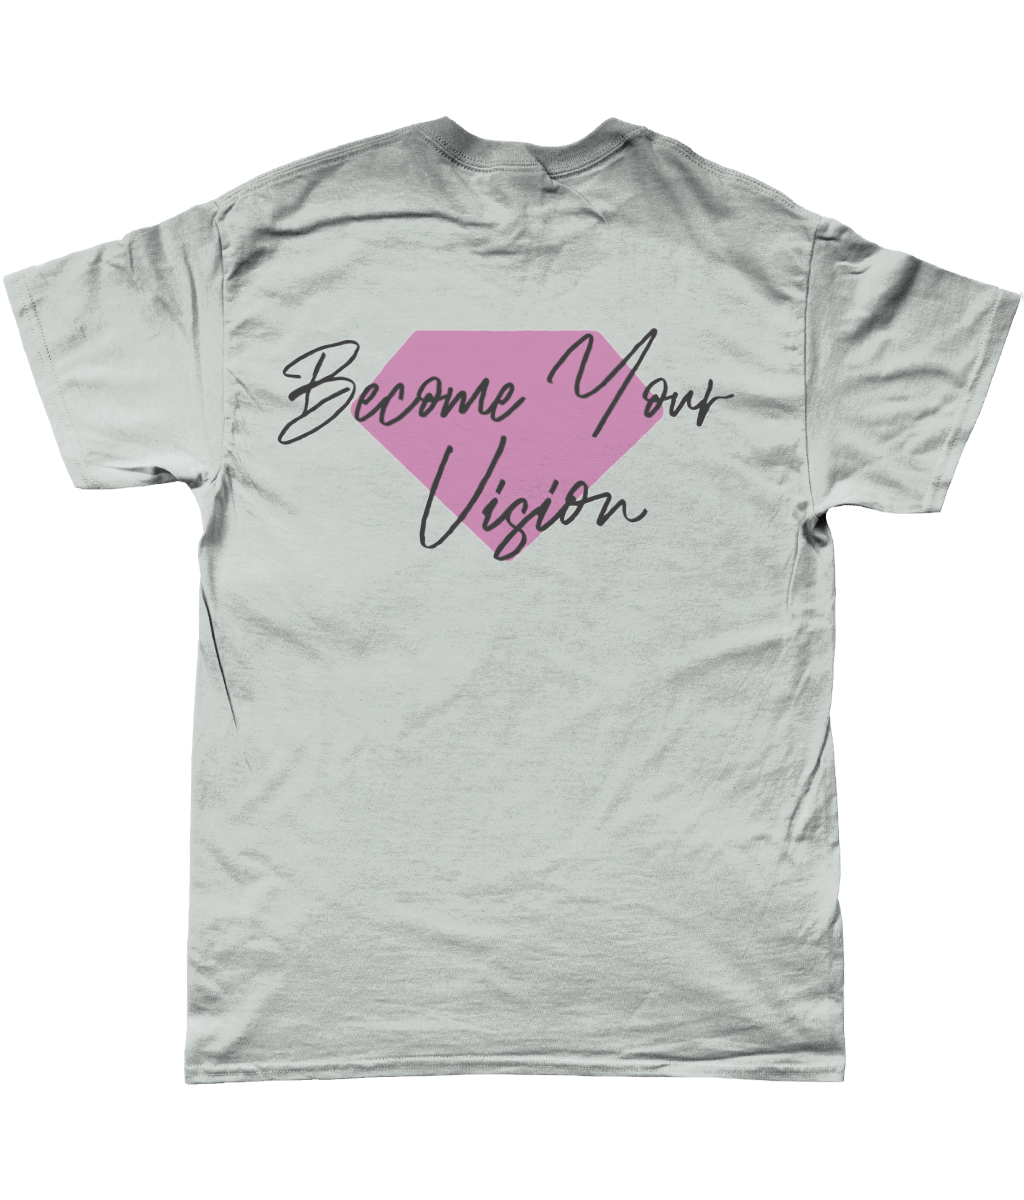 BECOME YOUR VISION T-SHIRT